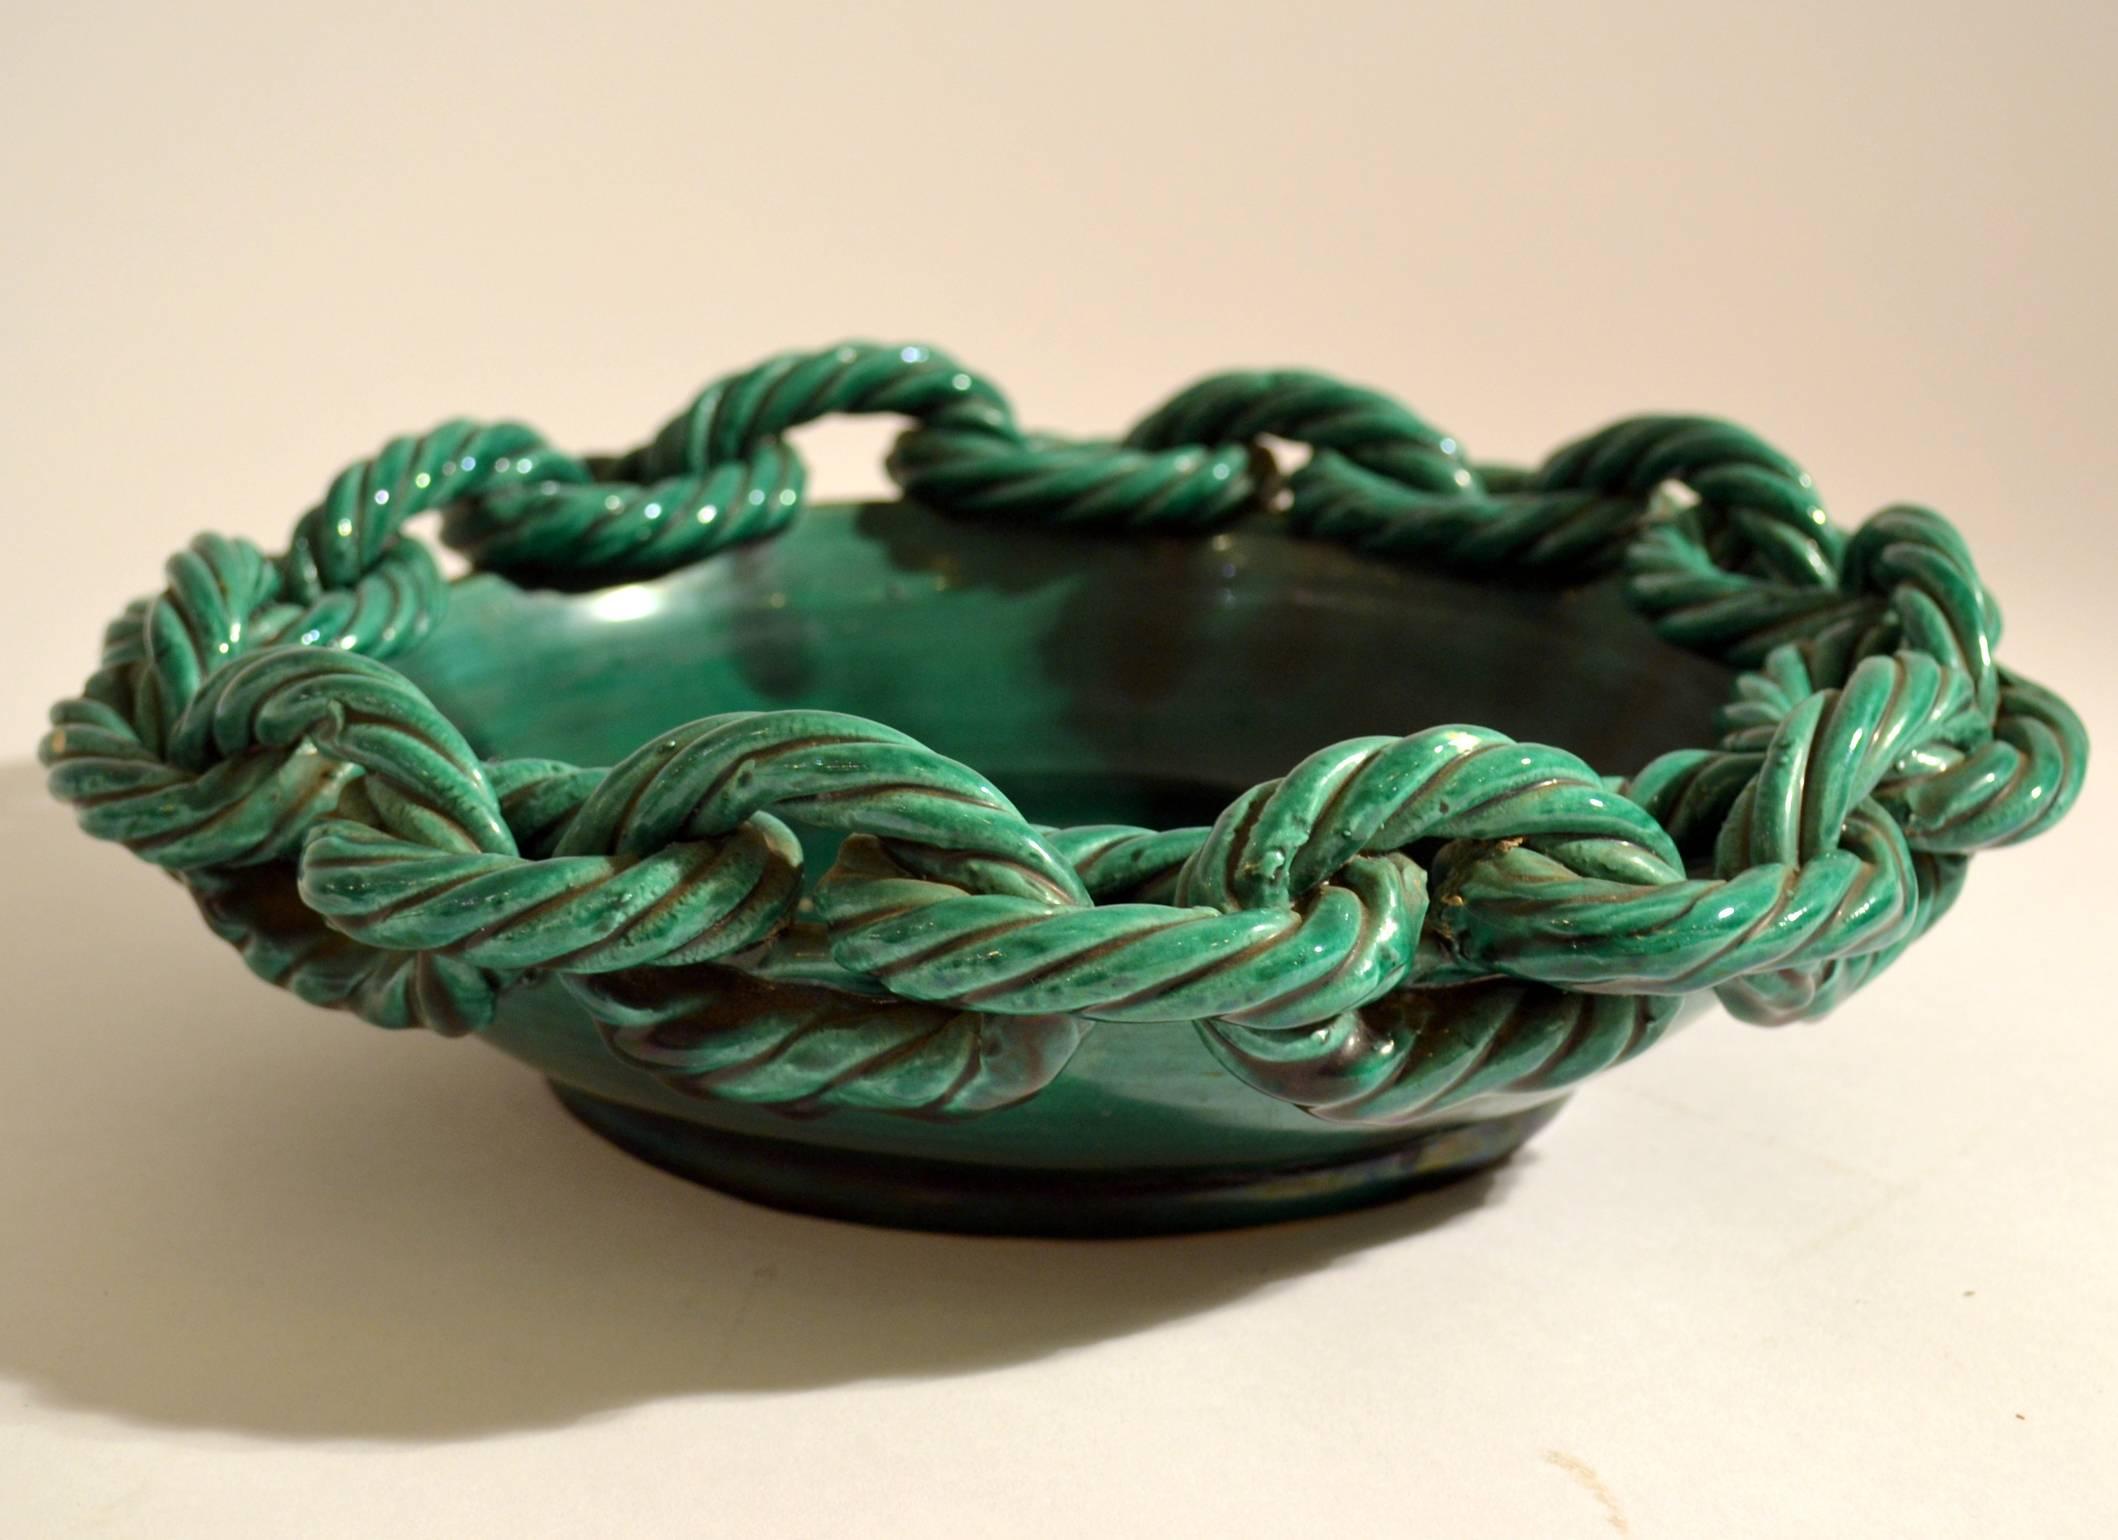 French 1950s Bowl in Emerald Green Ceramic with Chained Rope Edge by Vallauris, France